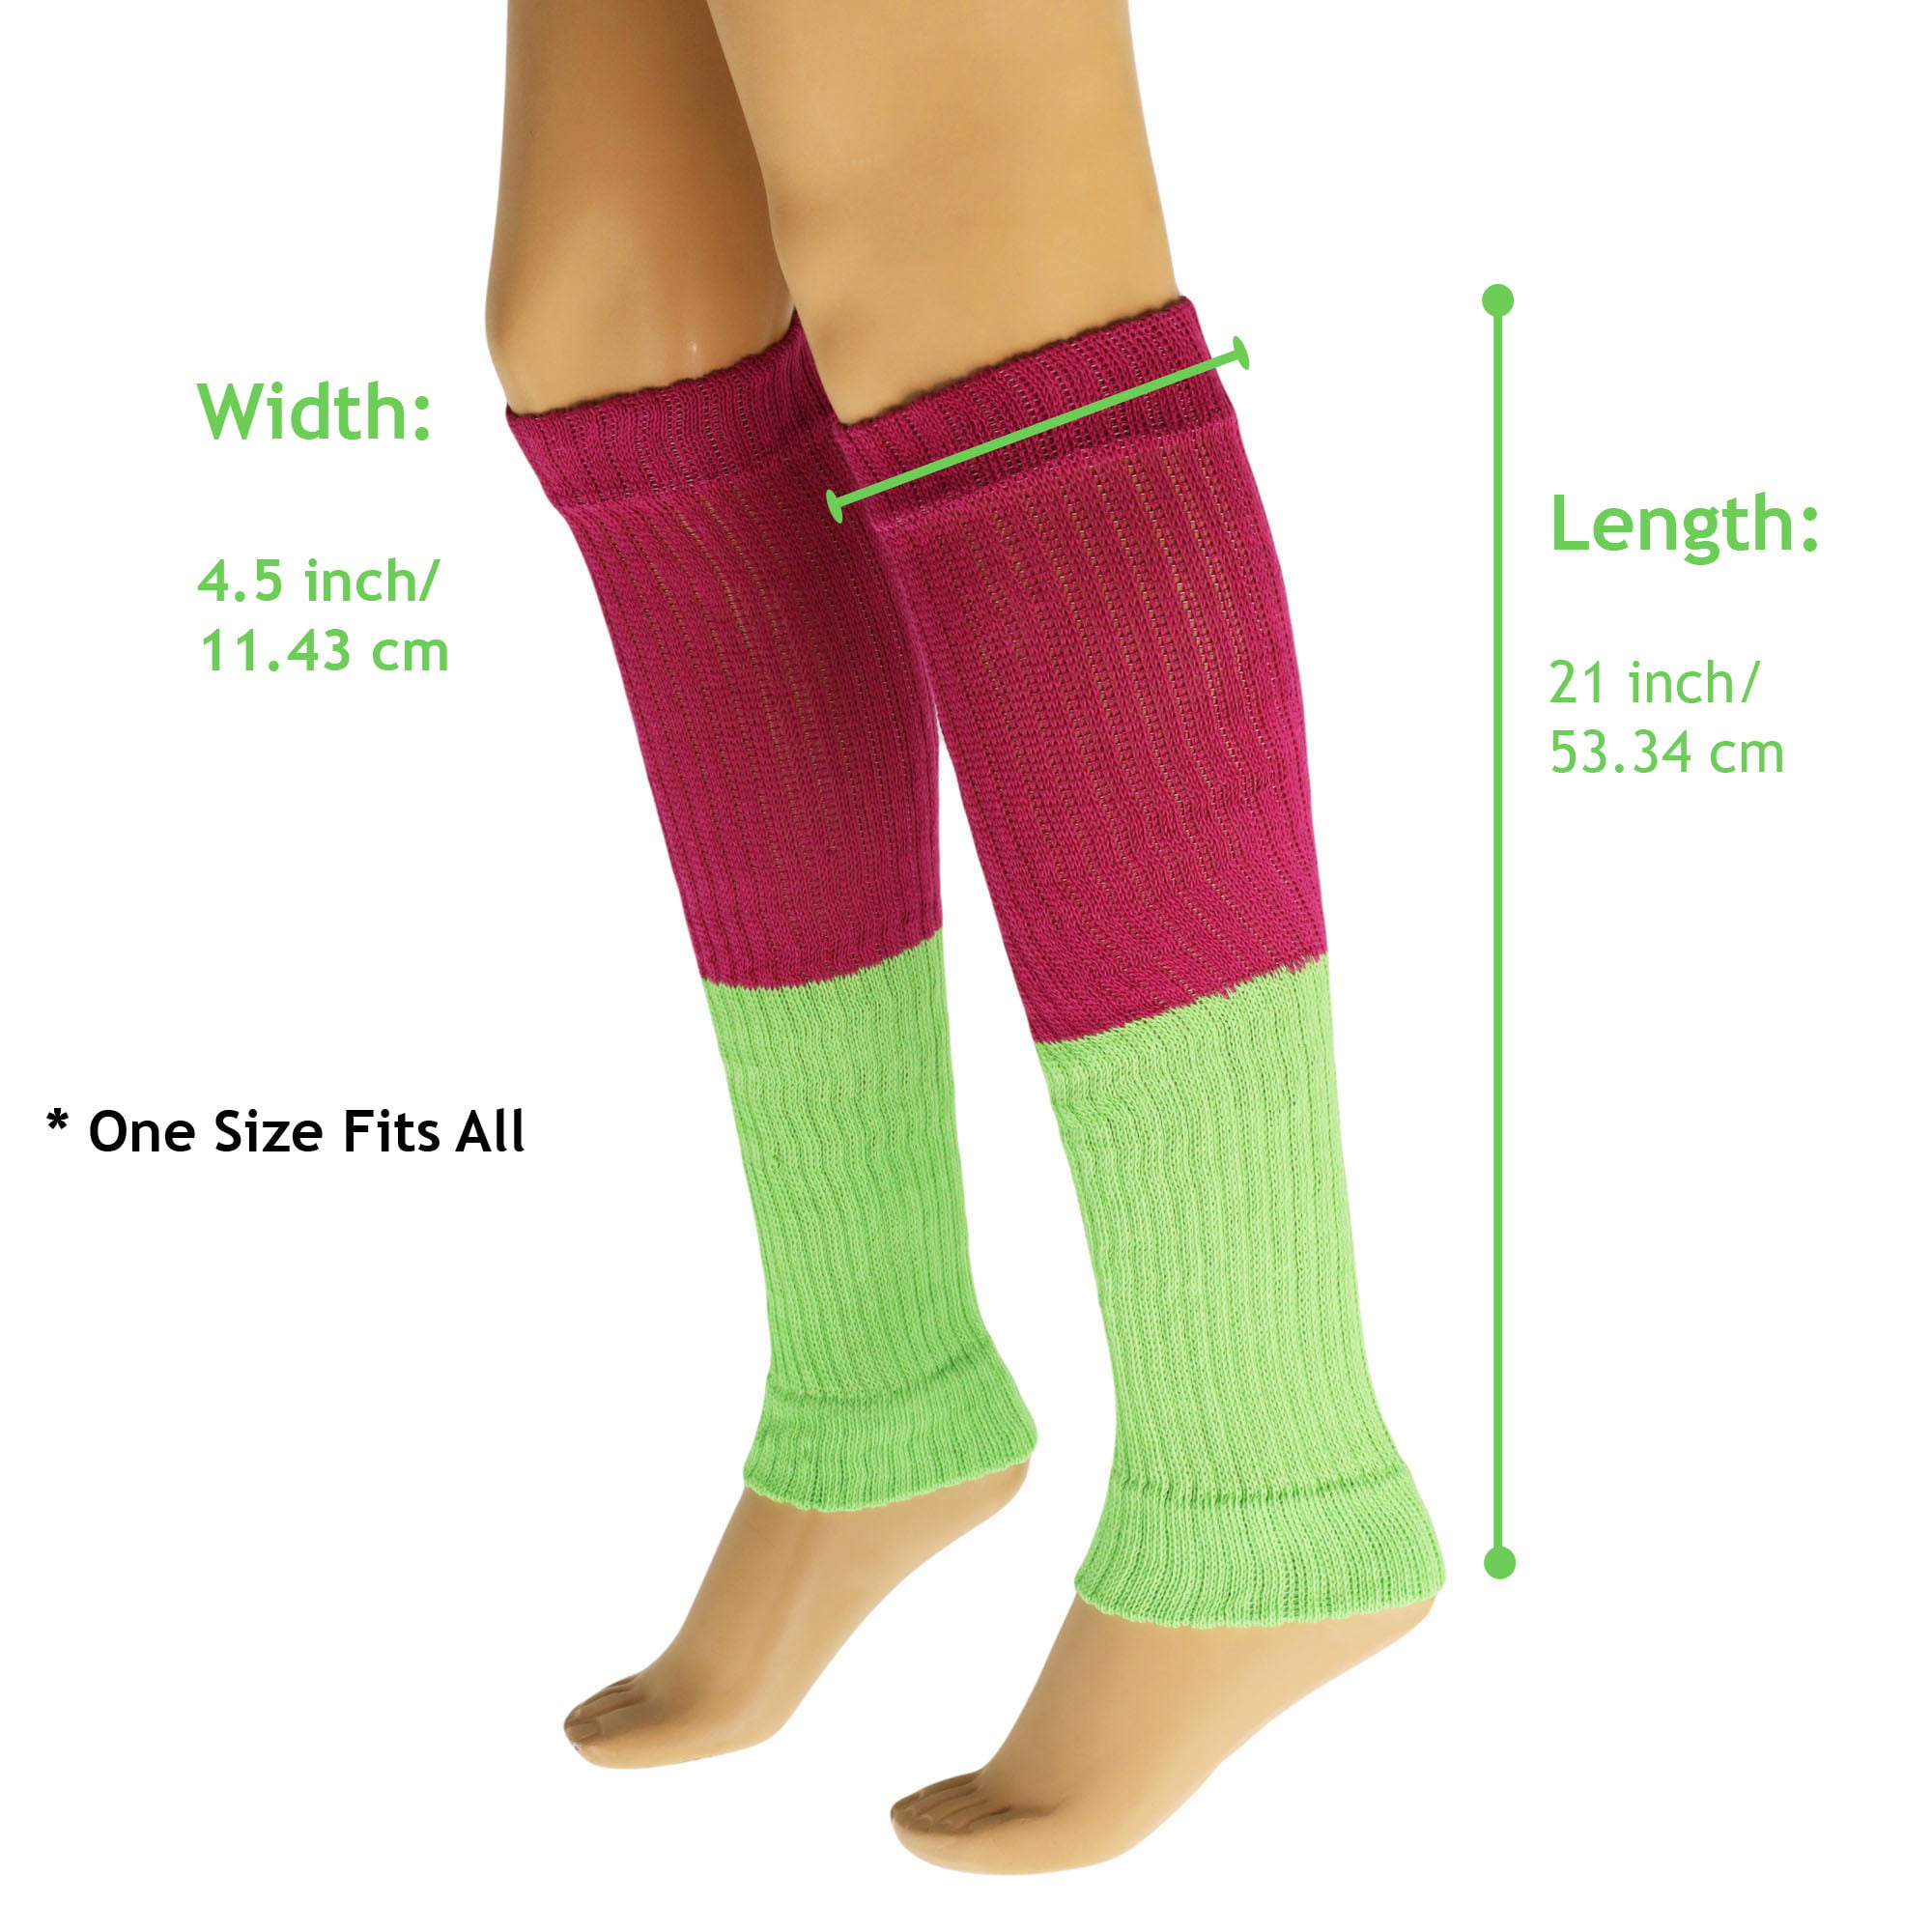 Cotton Leg Warmers for Women Red 1 Pair Knitted Retro 